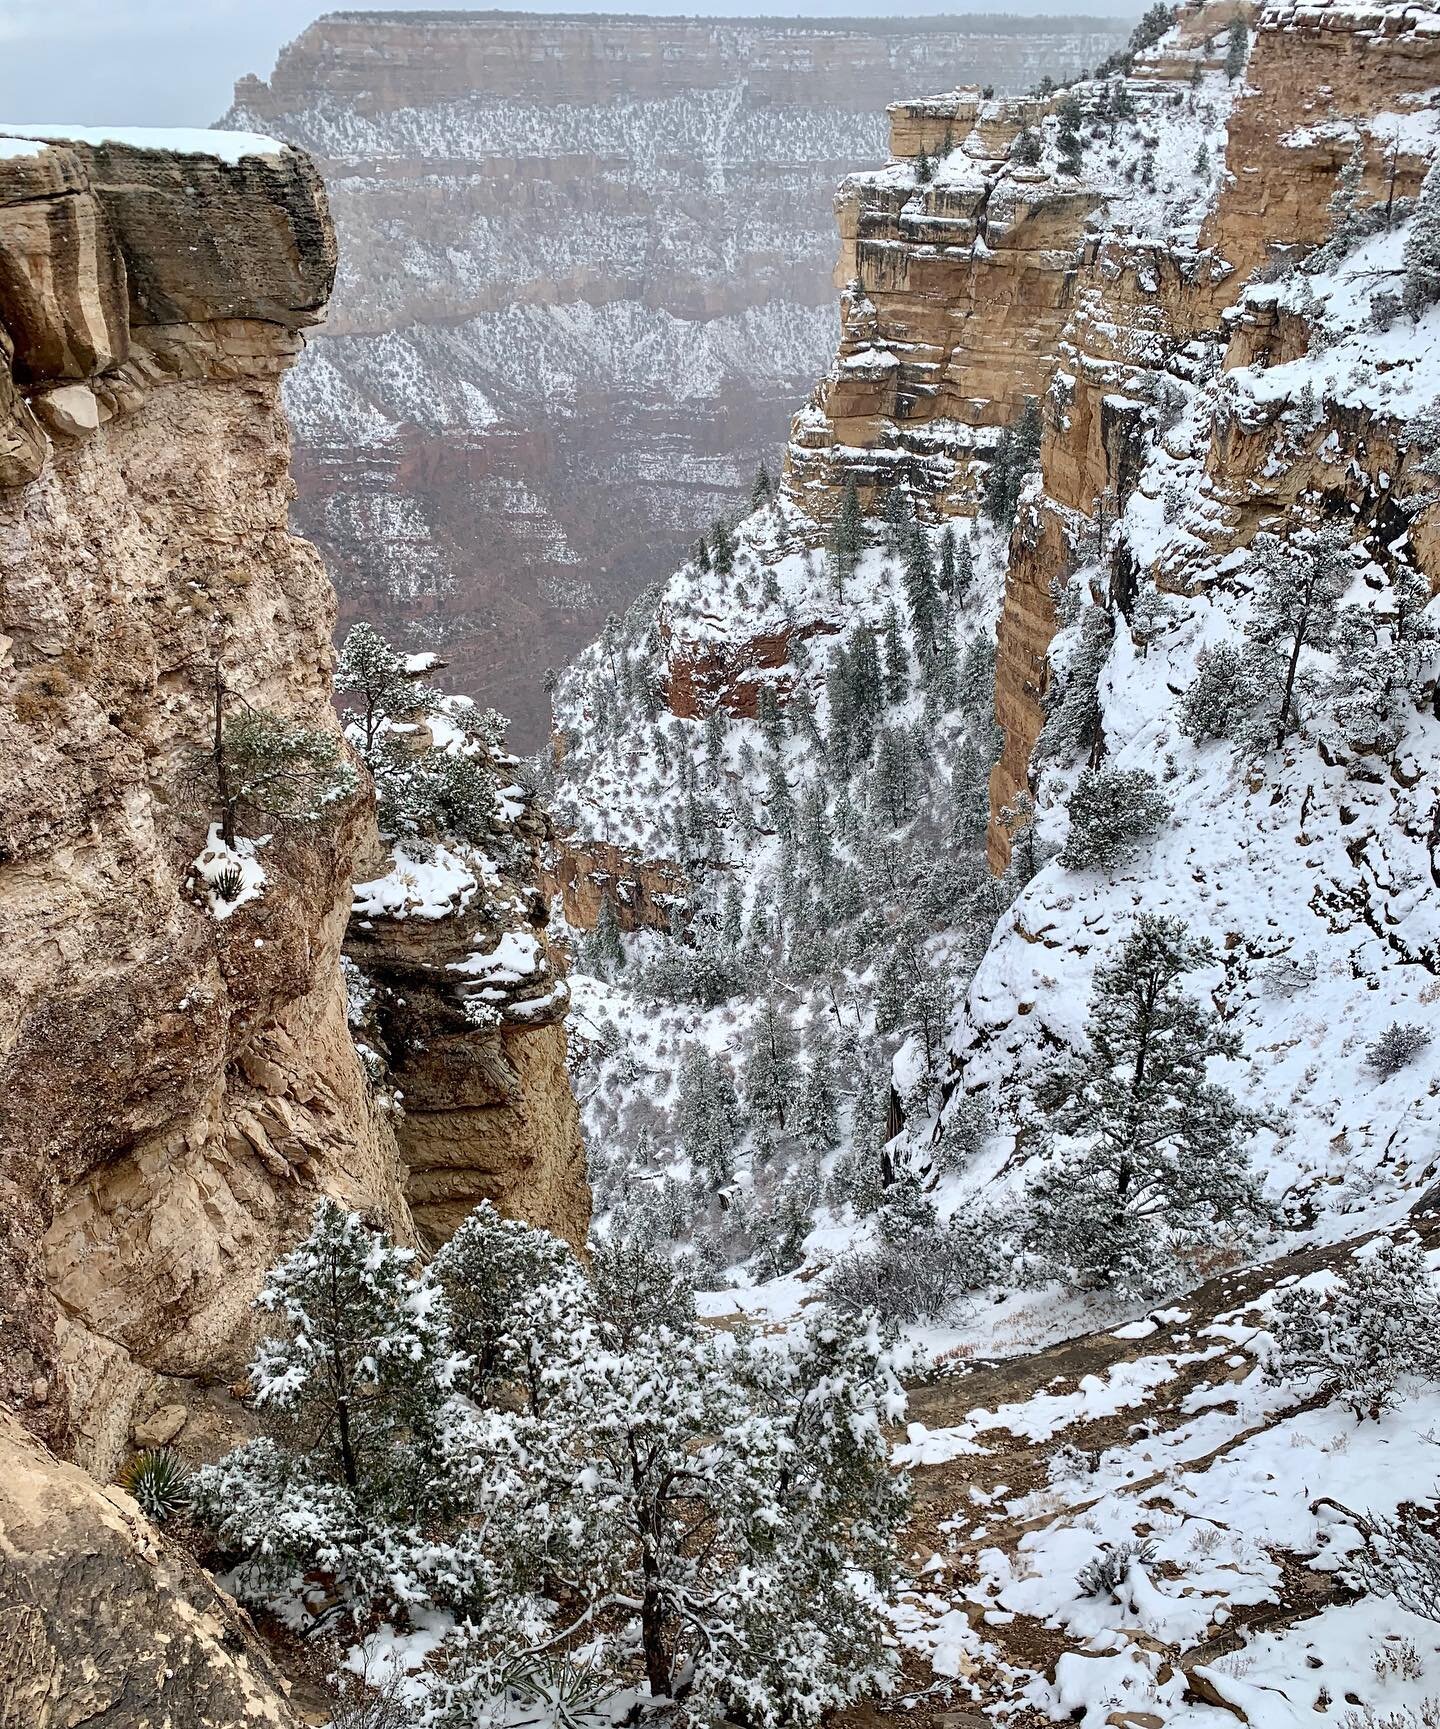 The Grand Canyon is beautiful, even when you can barely see it through all the snow. ❄️❄️❄️ #grandcanyon #snowday #snow #roadtrip #nationalpark #travel #safetravels #arizona #snowy #wanderlust #wander #wandersnevercease